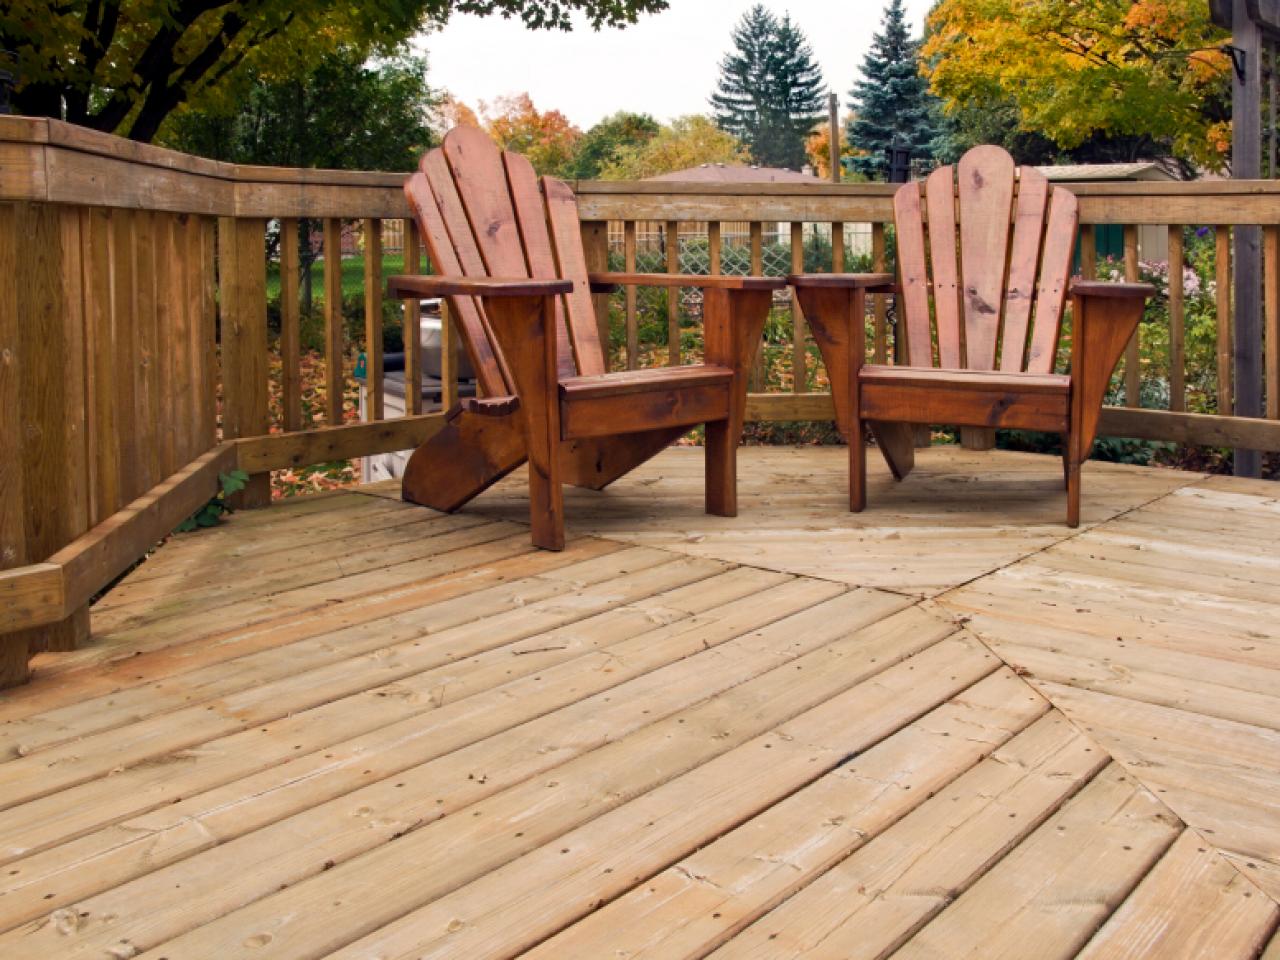 Wood Decking Materials, What Is The Best Material For Outdoor Decks